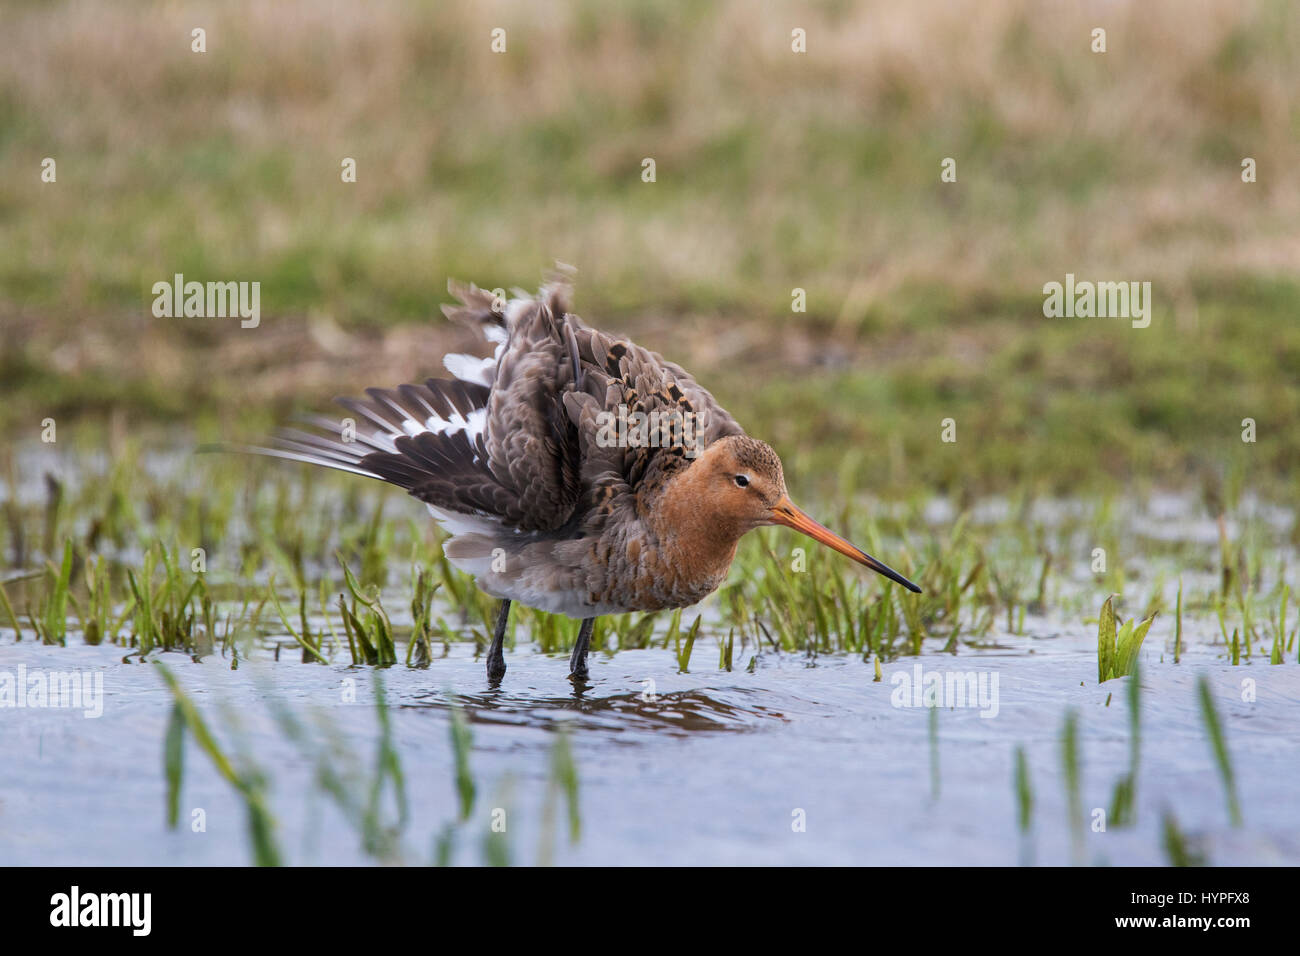 Black-tailed godwit (Limosa limosa) male shaking its wings in wetland in spring Stock Photo